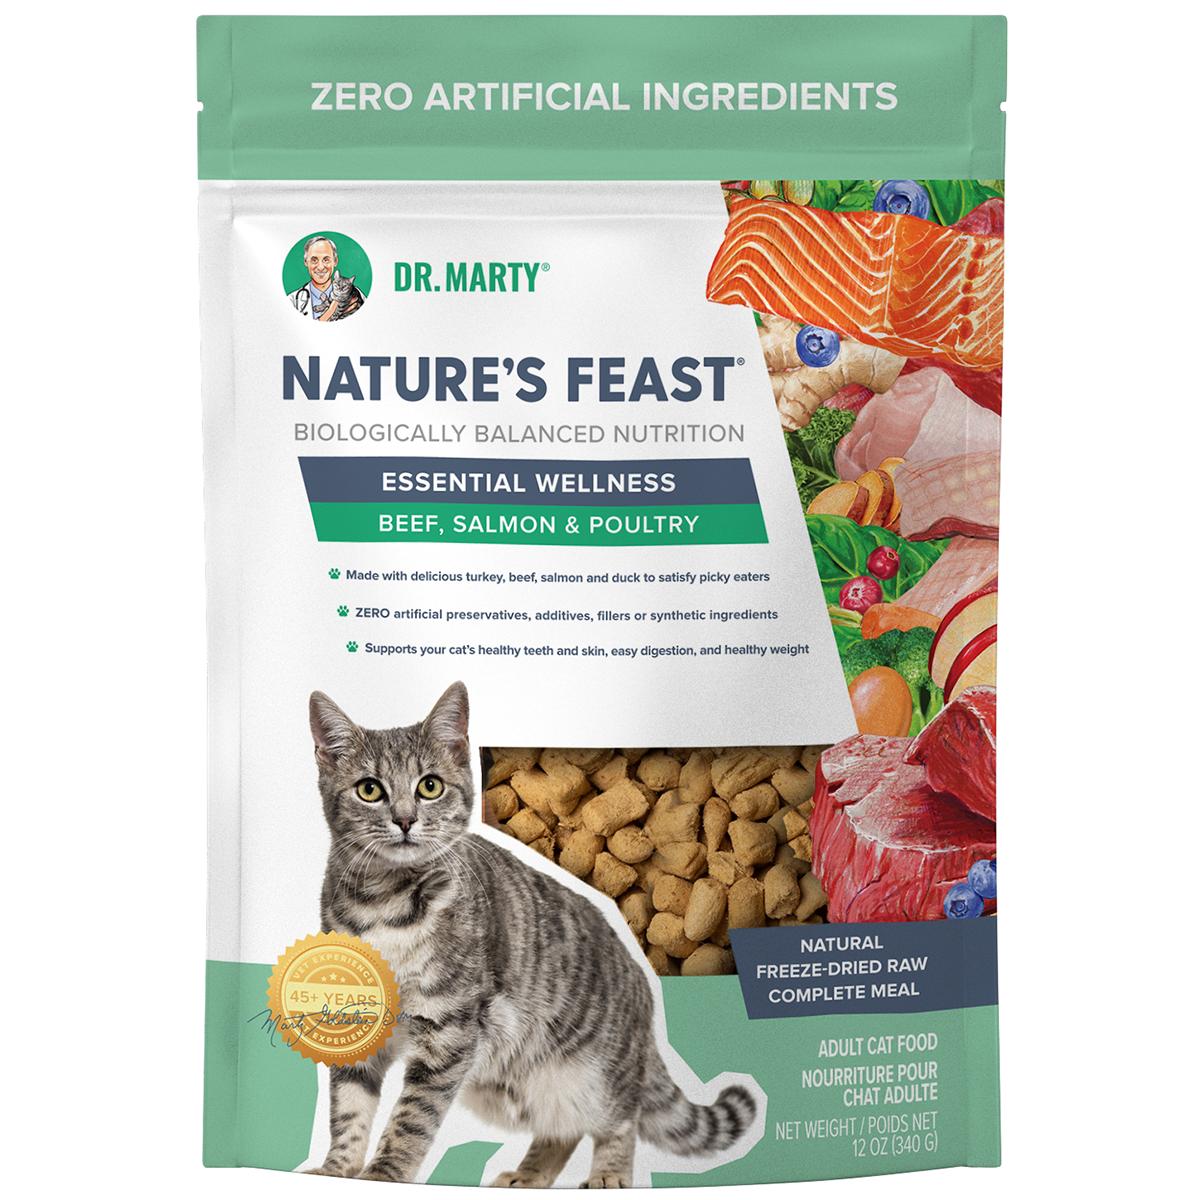 Dr. Marty Nature's Feast Essential Wellness Freeze-Dried Beef, Salmon & Poultry Cat Food